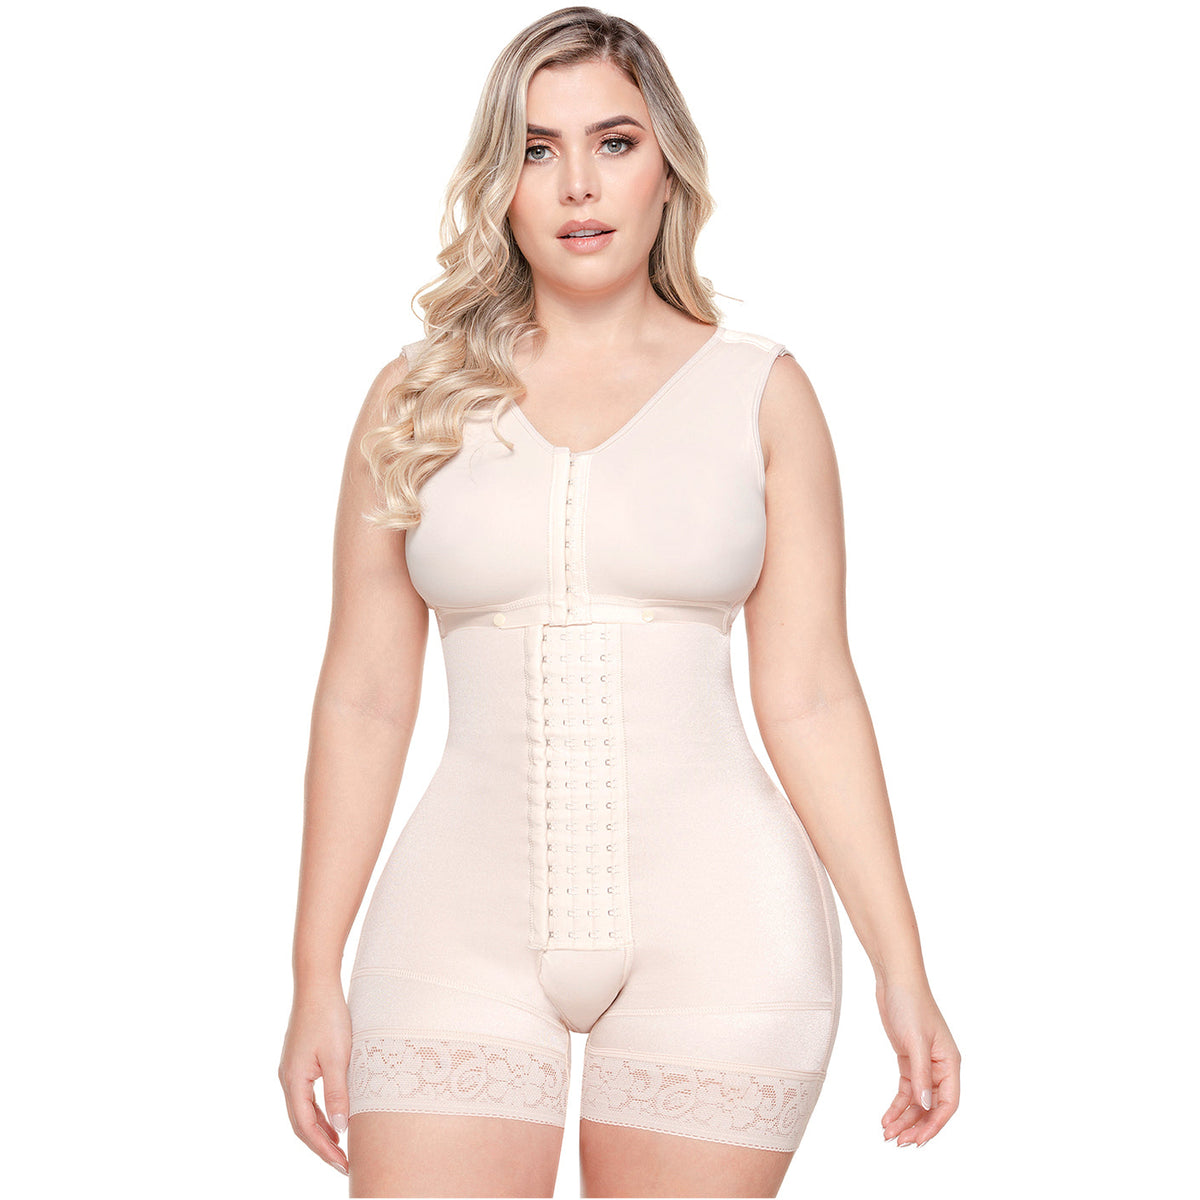 SONRYSE TR86BF Built in Bra Tummy Control Daily and Post Surgery Use Girdle